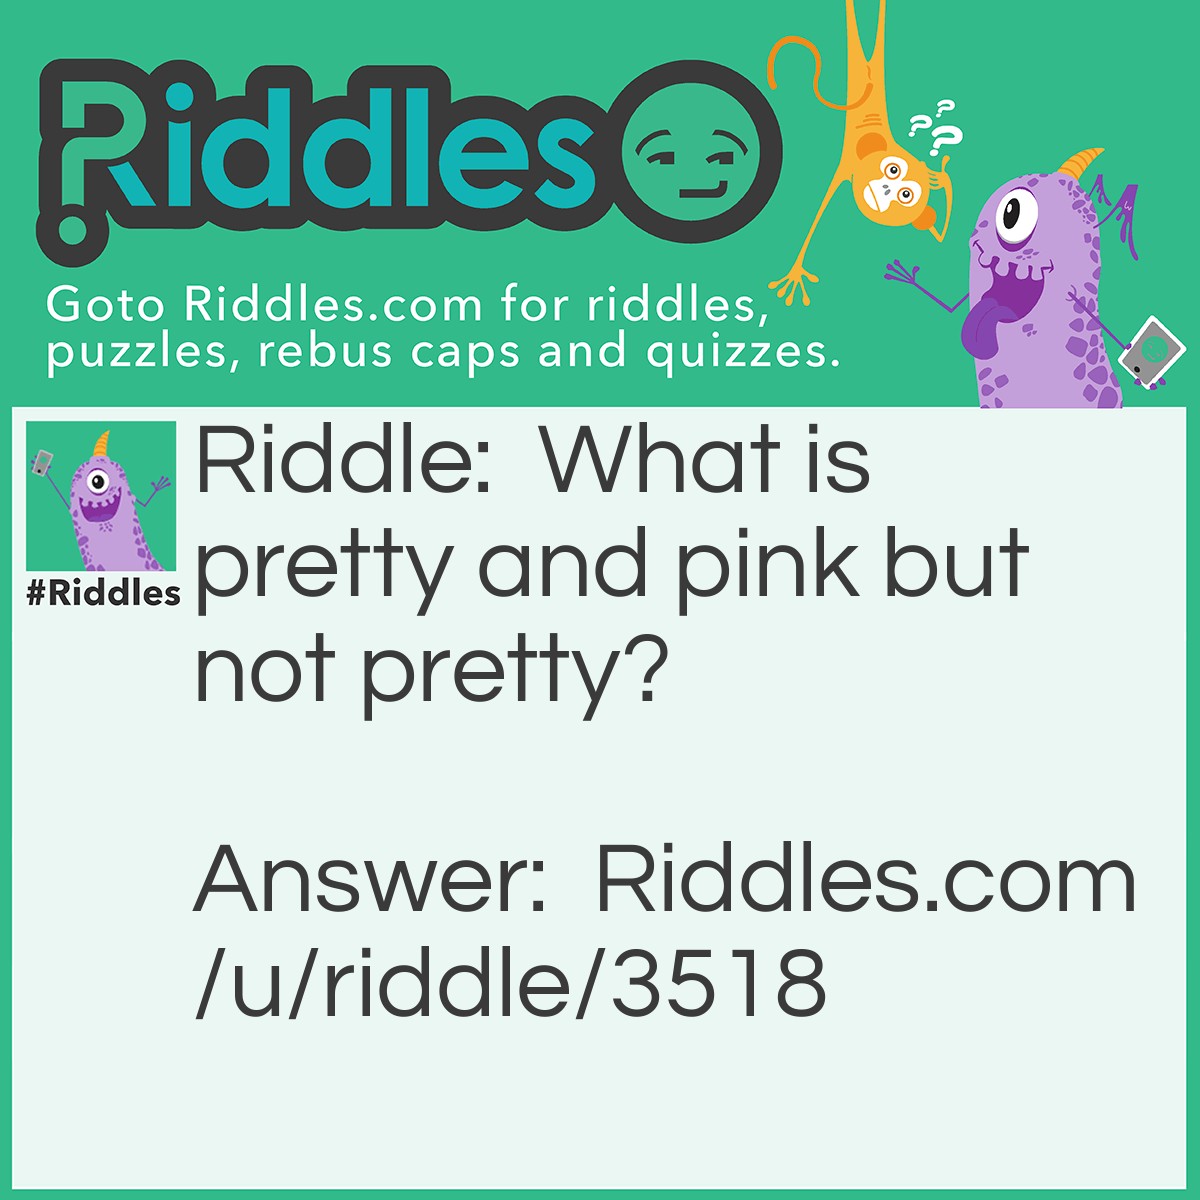 Riddle: What is pretty and pink but not pretty? Answer: Pink!